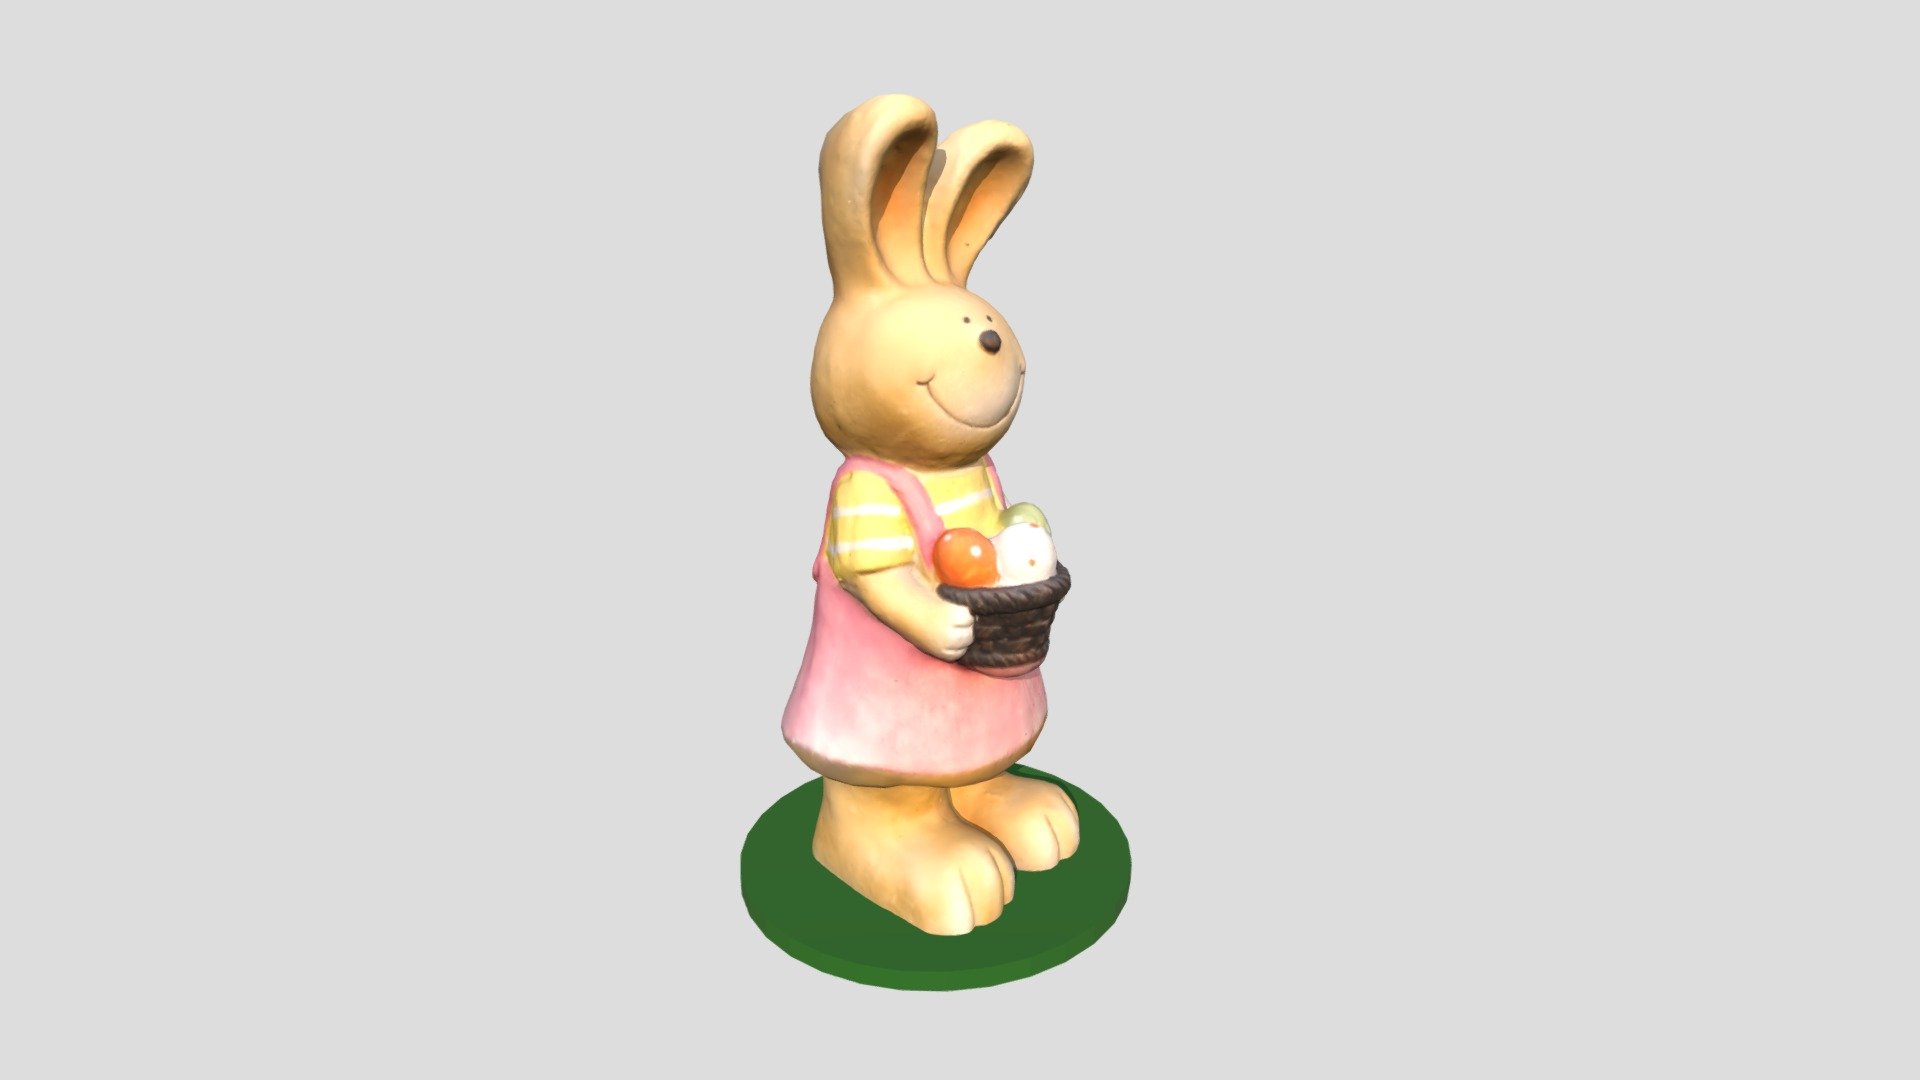 This Easter Rabbit is actually an outside decoration sculpture I've bought for a few euros at Action. I've captured it with photogrammetry and edited with Agisoft Metashape and slightly modified the vertices with Blender. 111 pictures were used for the reconstruction of this rabbit 3d model